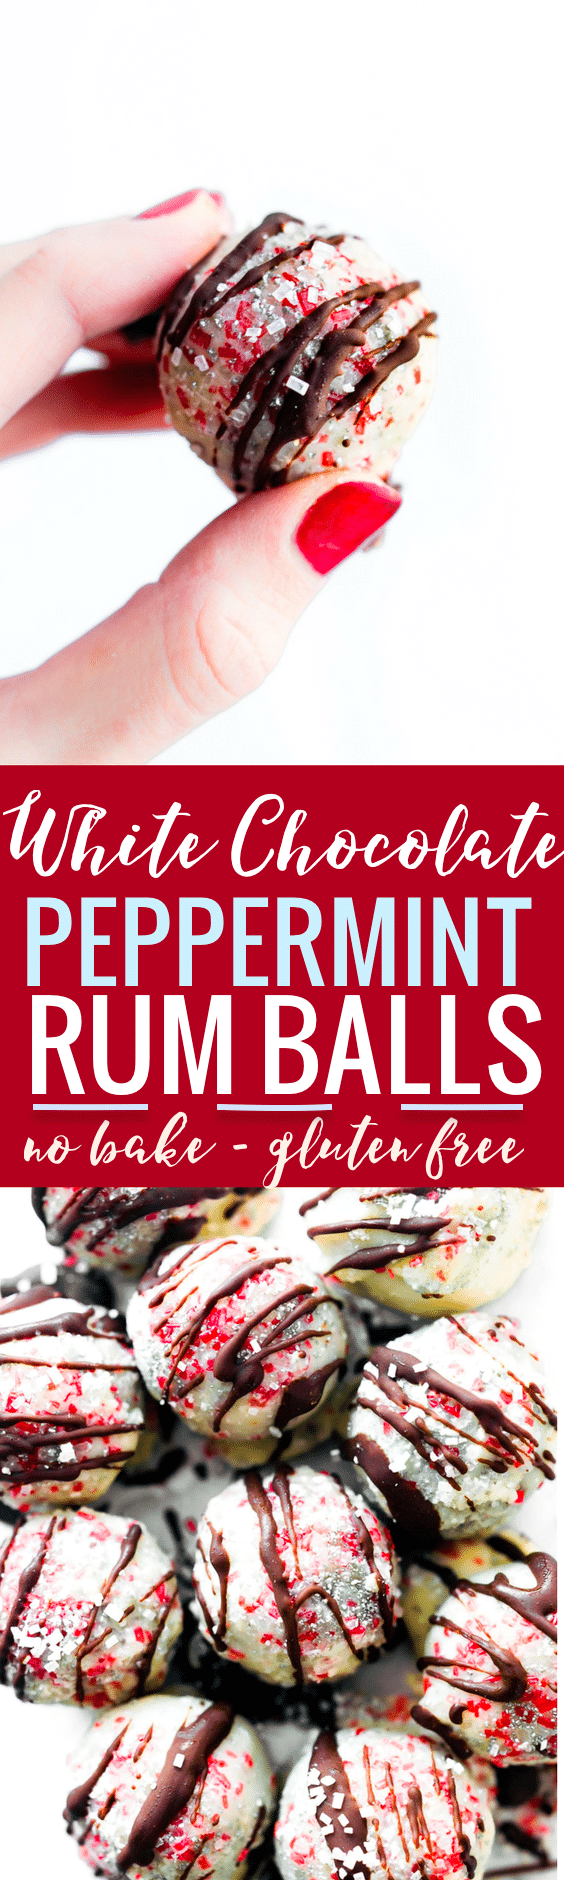 NO BAKE WHITE CHOCOLATE PEPPERMINT RUM BALLS! Think of these as truffles with a festive flare! Perfect for the holidays. Gluten free and easy to make. #nobake #holidays #dessert #glutenfree